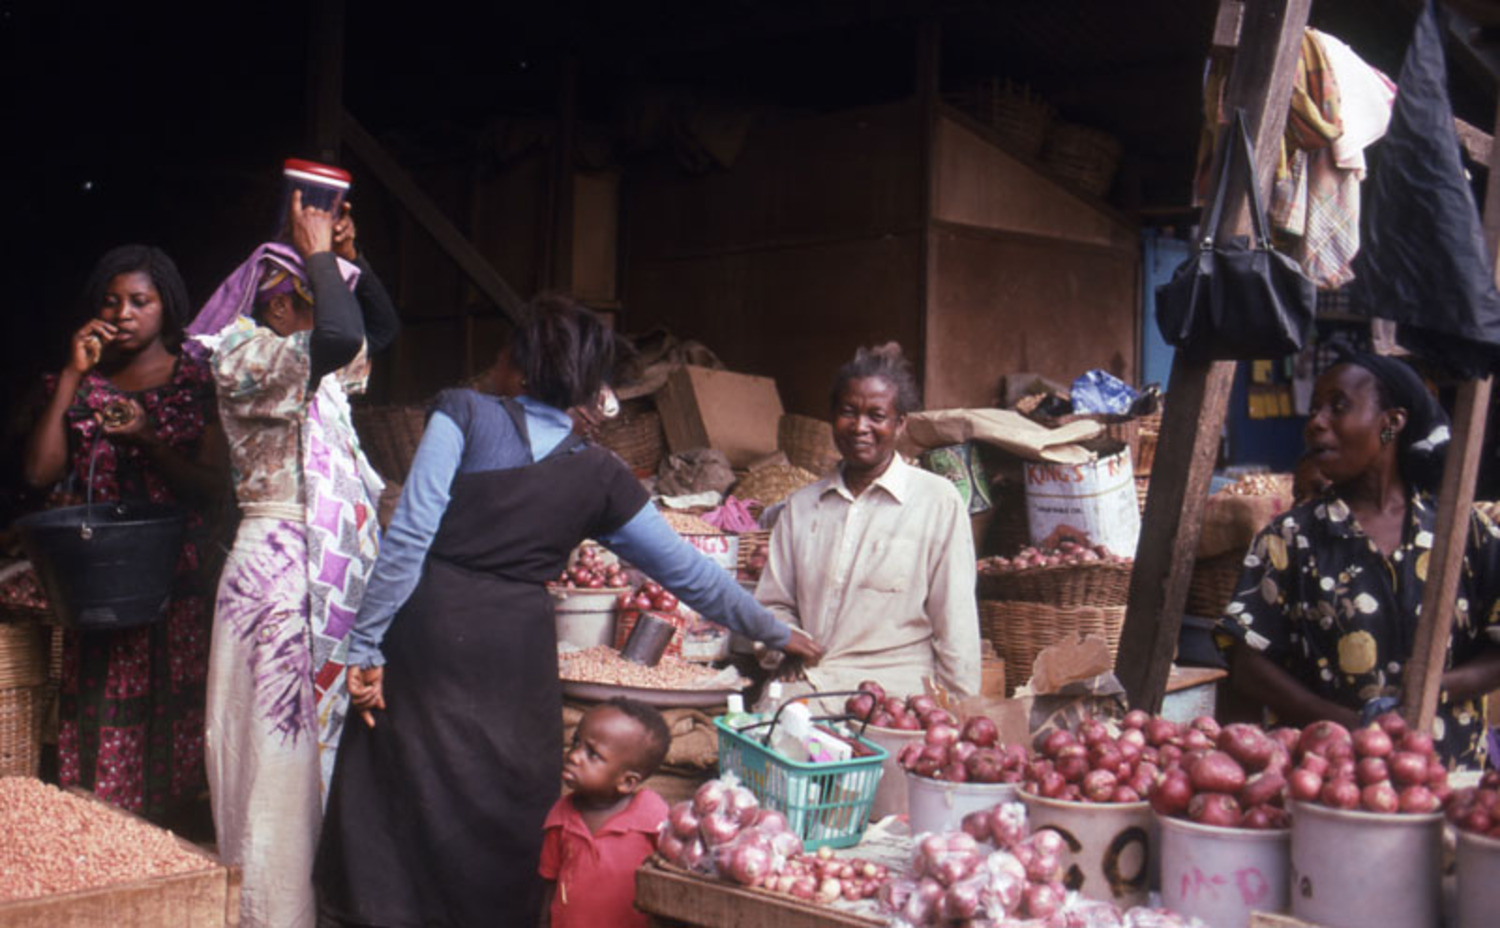 Onion trader at corner of onion shed with customers